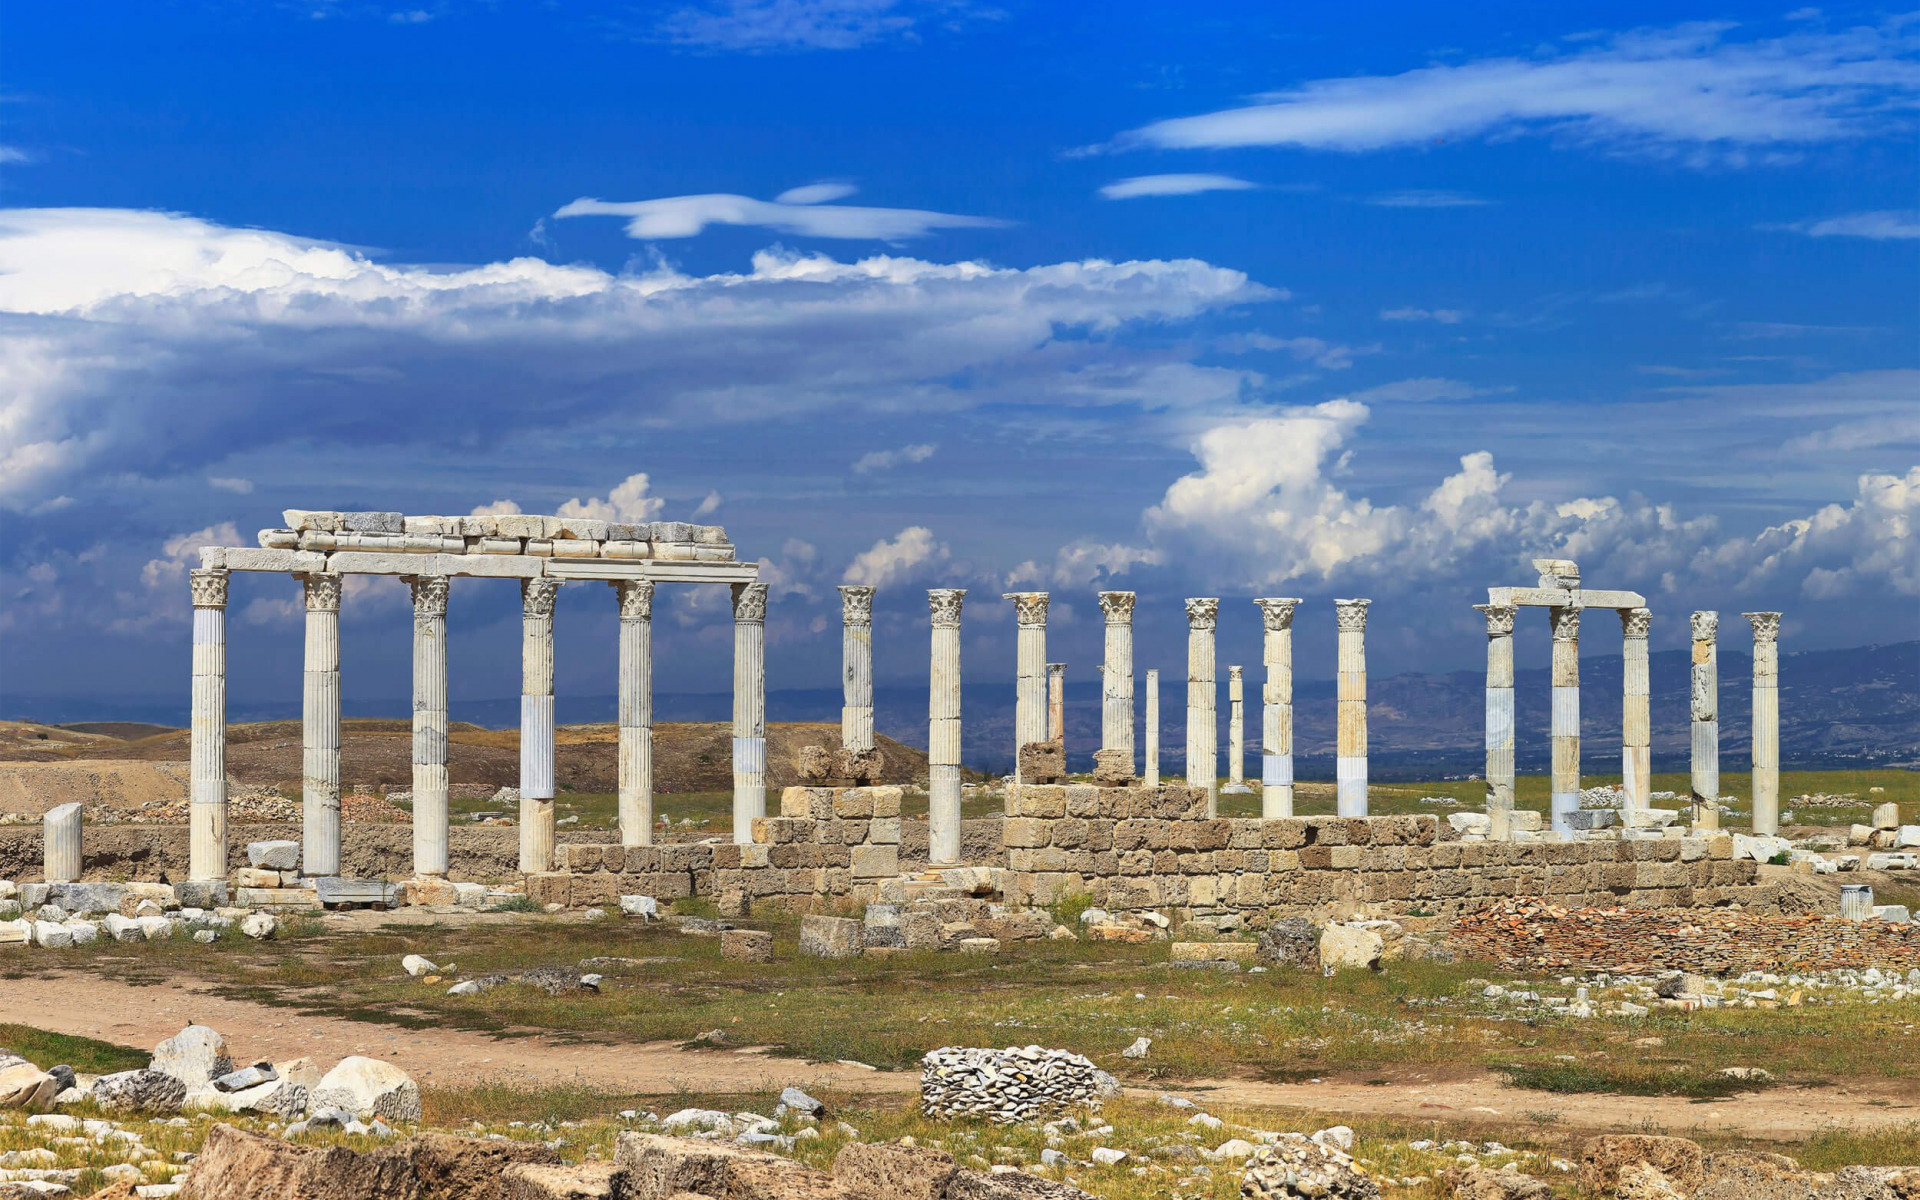 Download wallpaper The ancient city of Laodicea, Denizli, Laodikeia, Pamukkale, ancient columns, Turkey for desktop with resolution 1920x1200. High Quality HD picture wallpaper